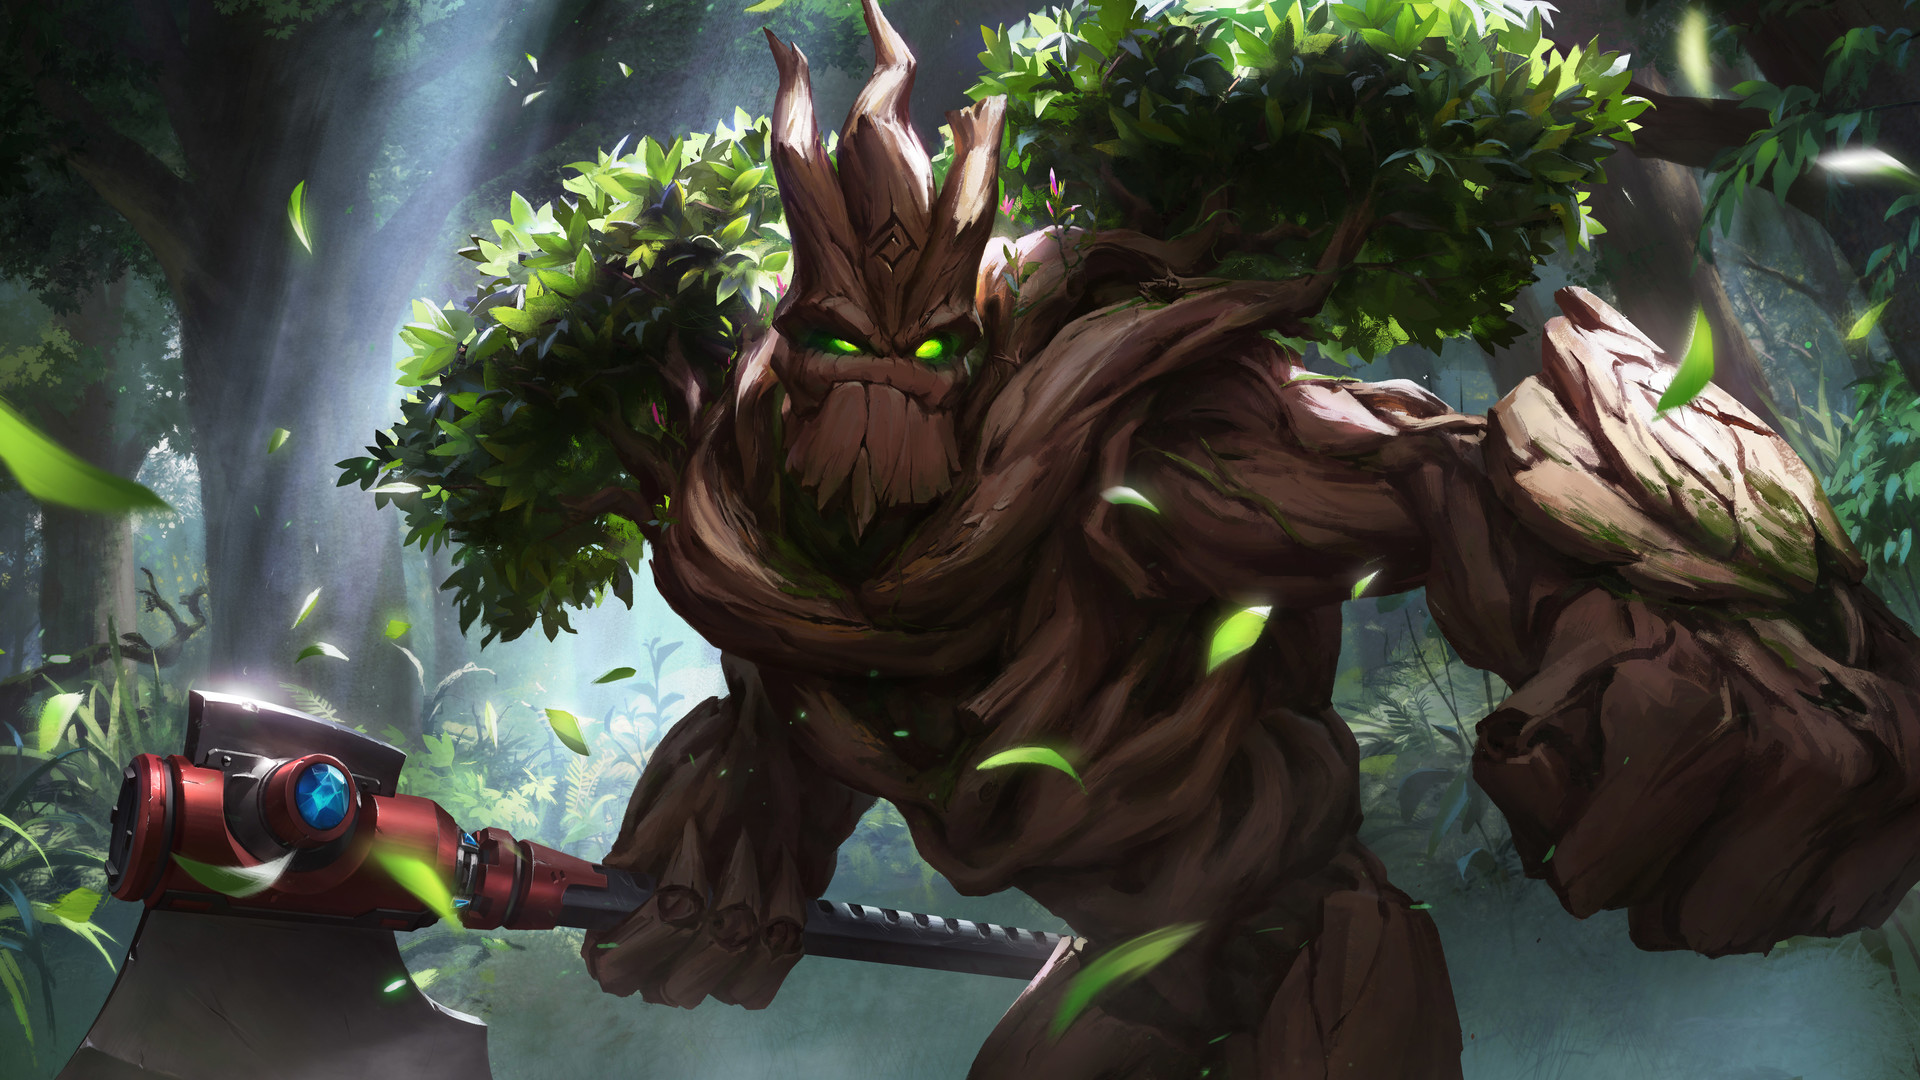 Axe Creature Grover Paladins Paladins Video Game Tree Warrior 1920x1080